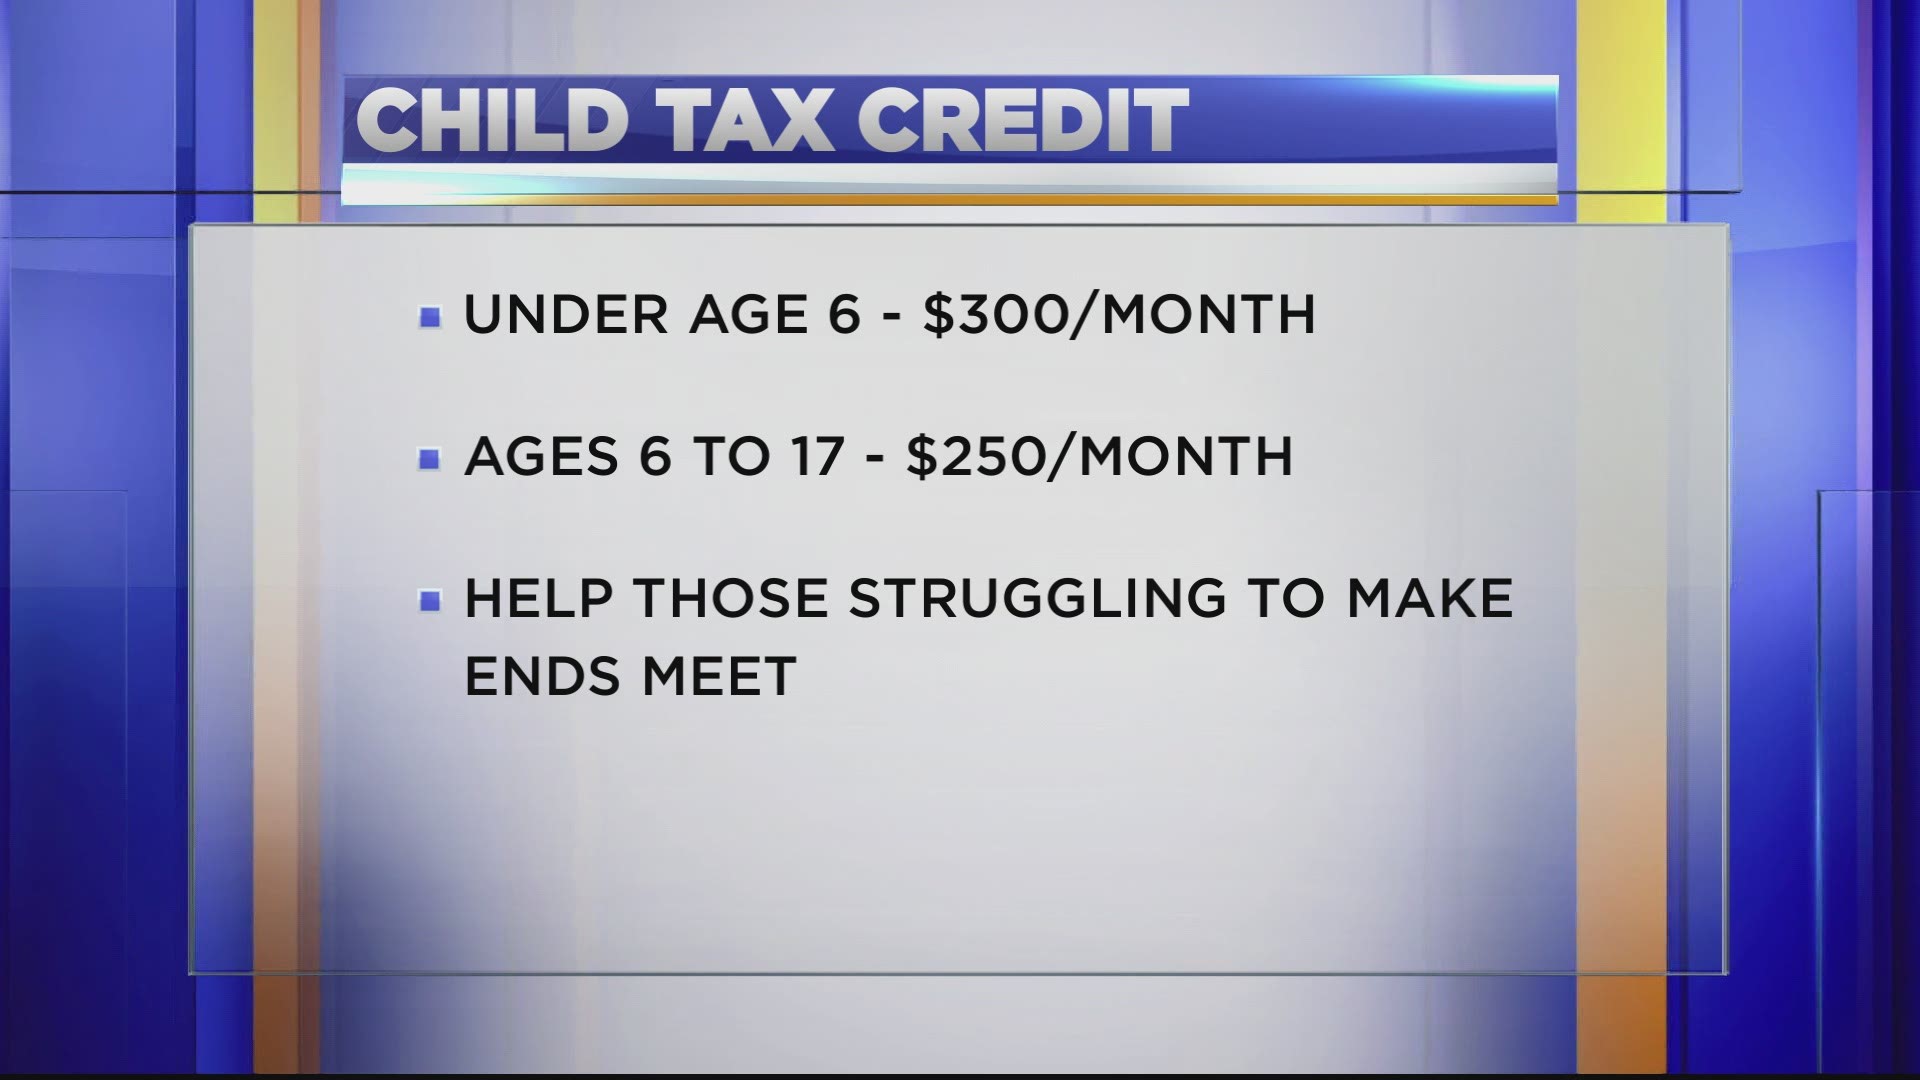 The new Child Tax Credit gives guardians $300 a month for kids younger than six and $250 a month for children ages six to 17.